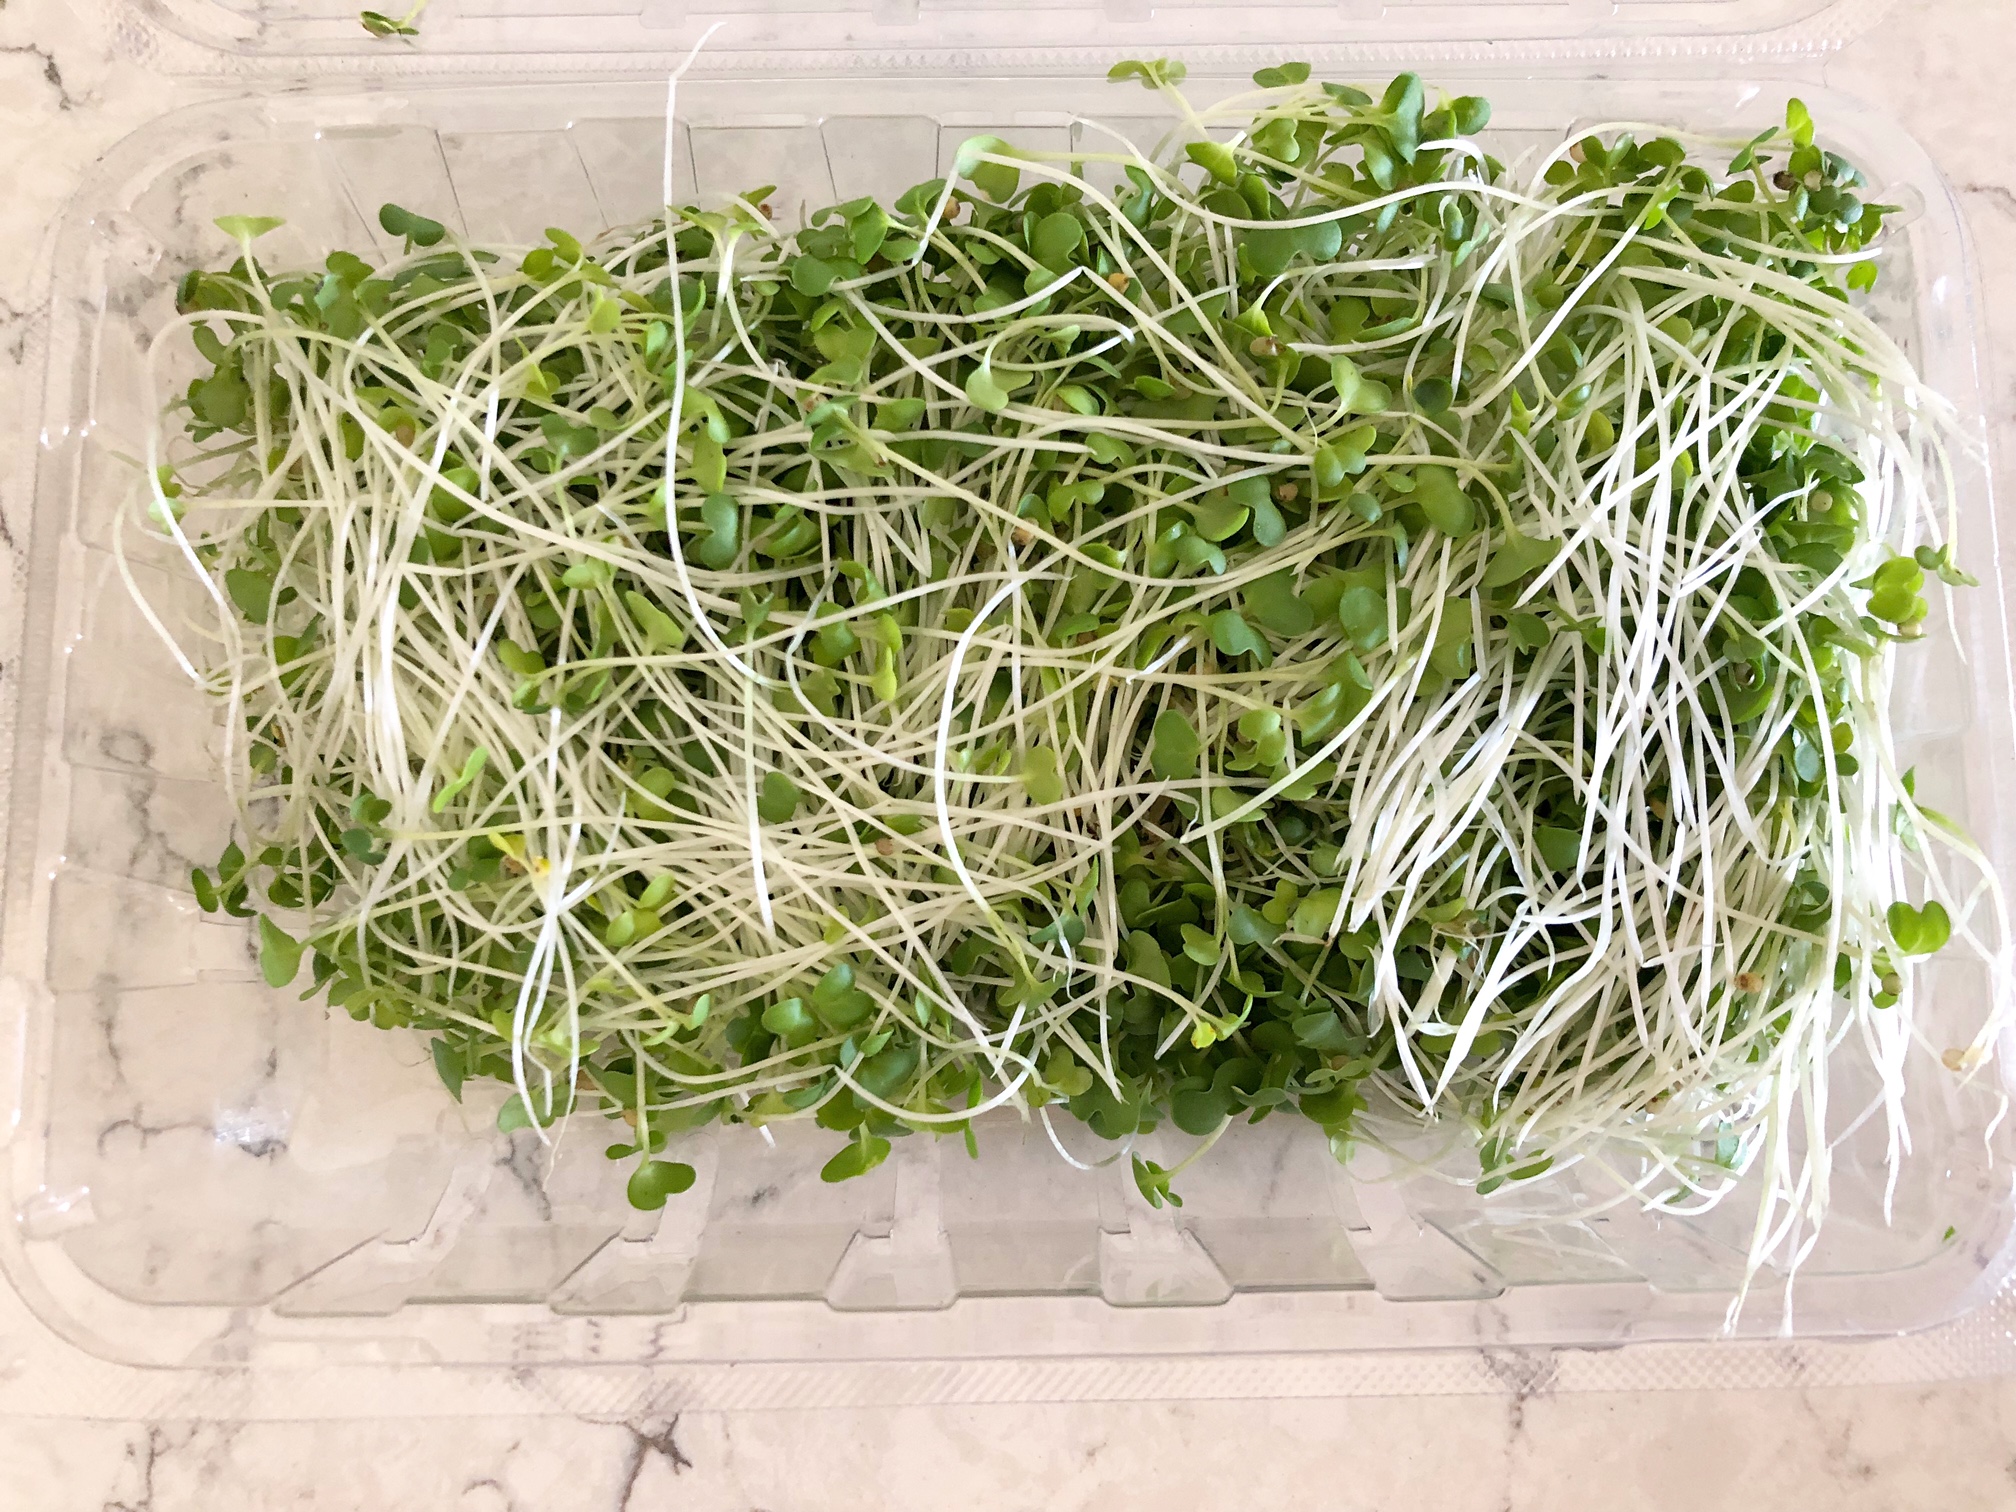 On a white counter, there is an opened plastic container of microgreens with little green tops and long, skinny white ends. Photo by Alyssa Buckley.